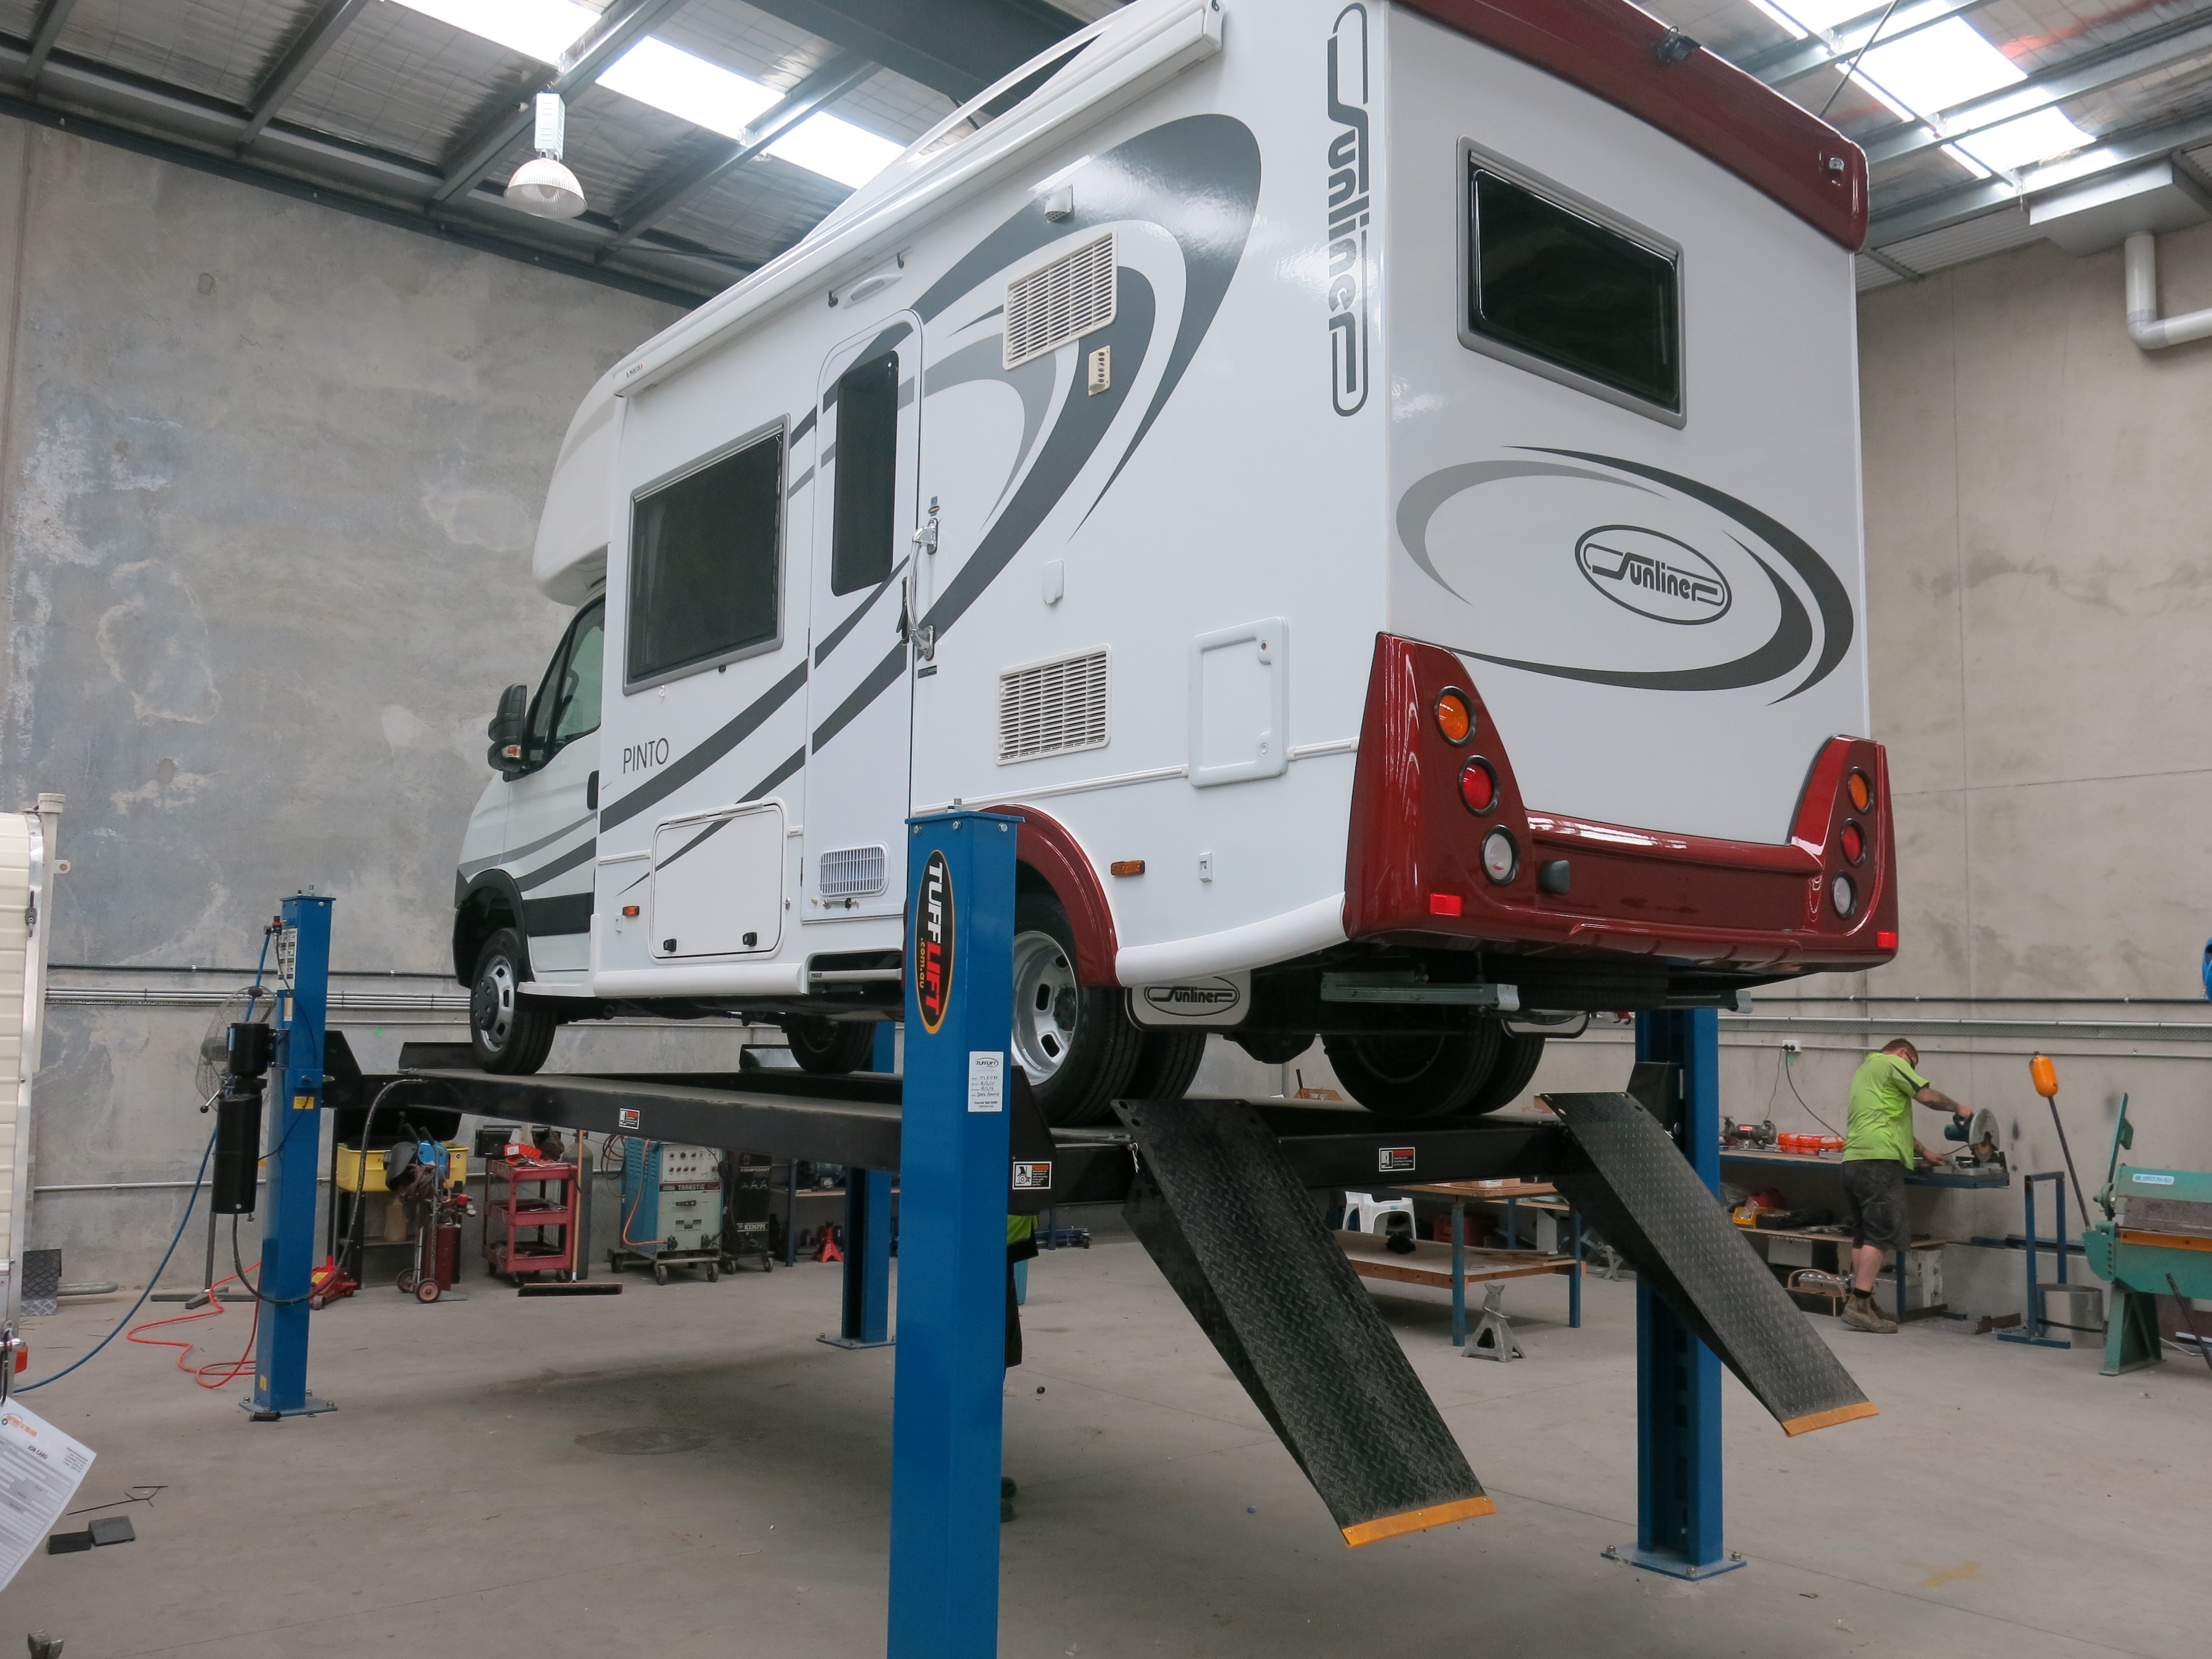 Caravan repairs and Services in Melbourne - Northern RV Services